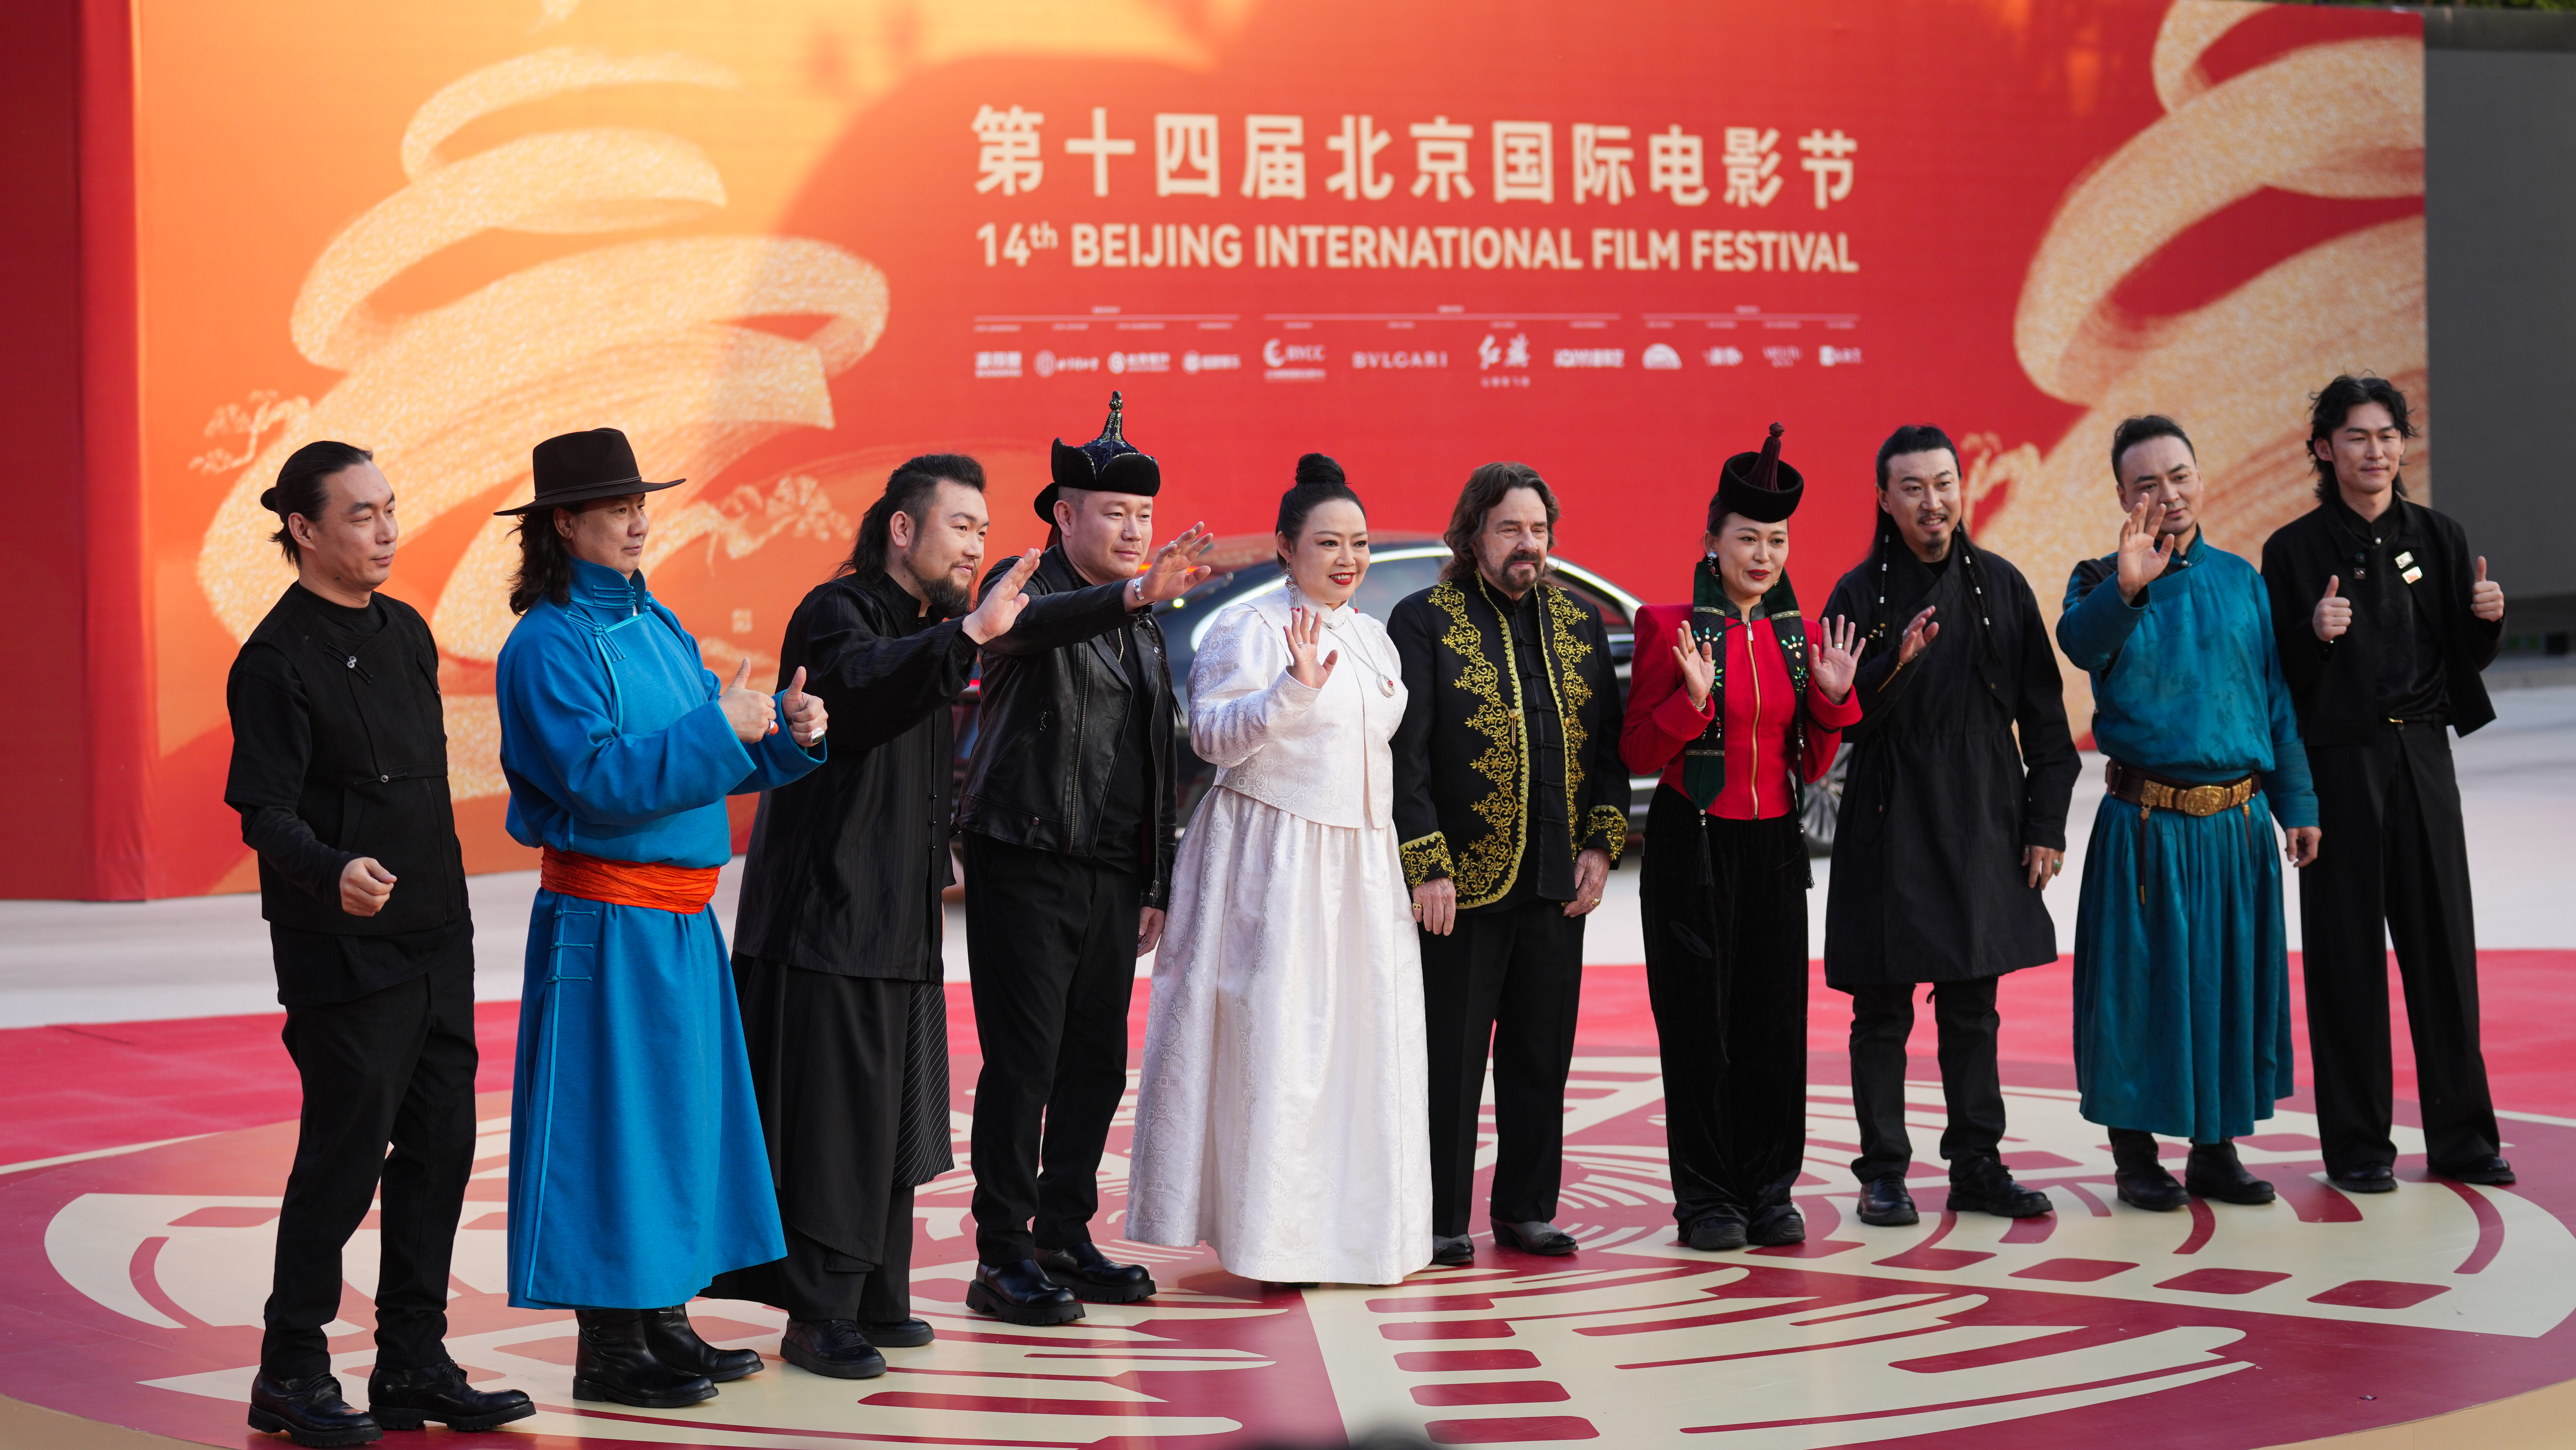 American singer Bertie Higgins and Chinese musicians on the red carpet at the opening ceremony of the 14th Beijing International Film Festival in Beijing, April 18, 2024. Chen Bo/CGTN